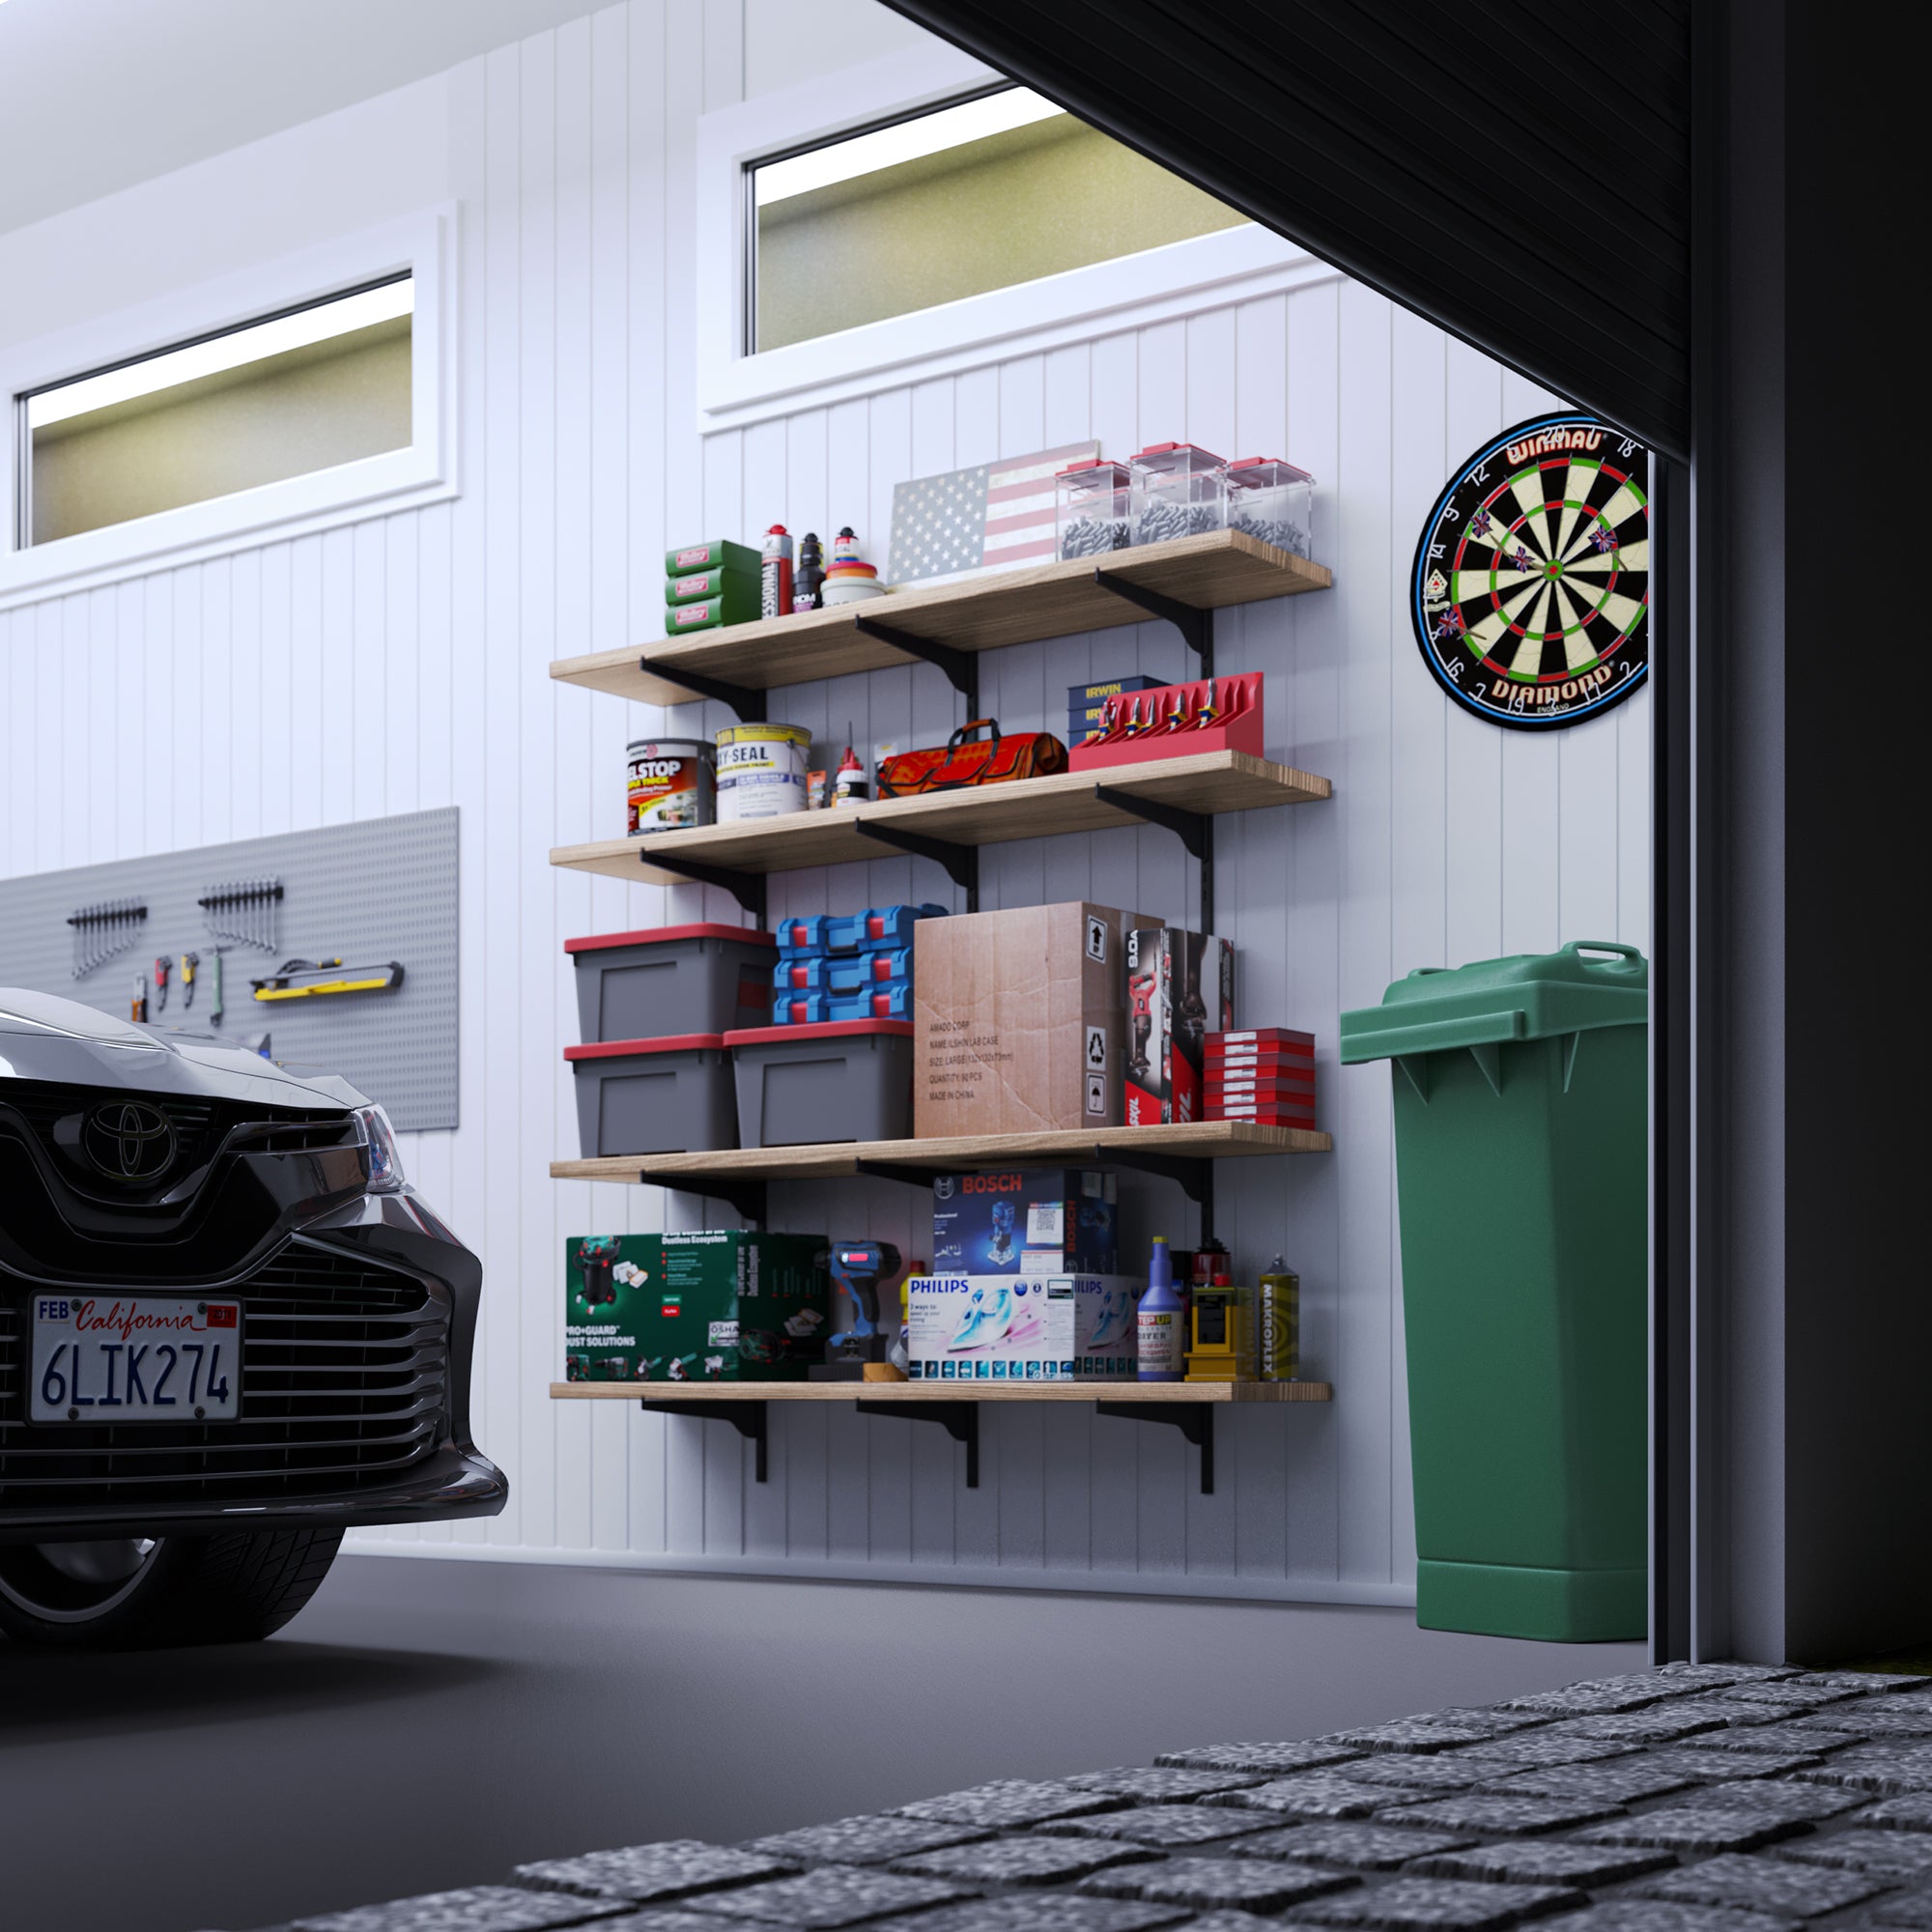 A well-organized garage scene with storage shelves, various tools, a dartboard, and part of a car visible.